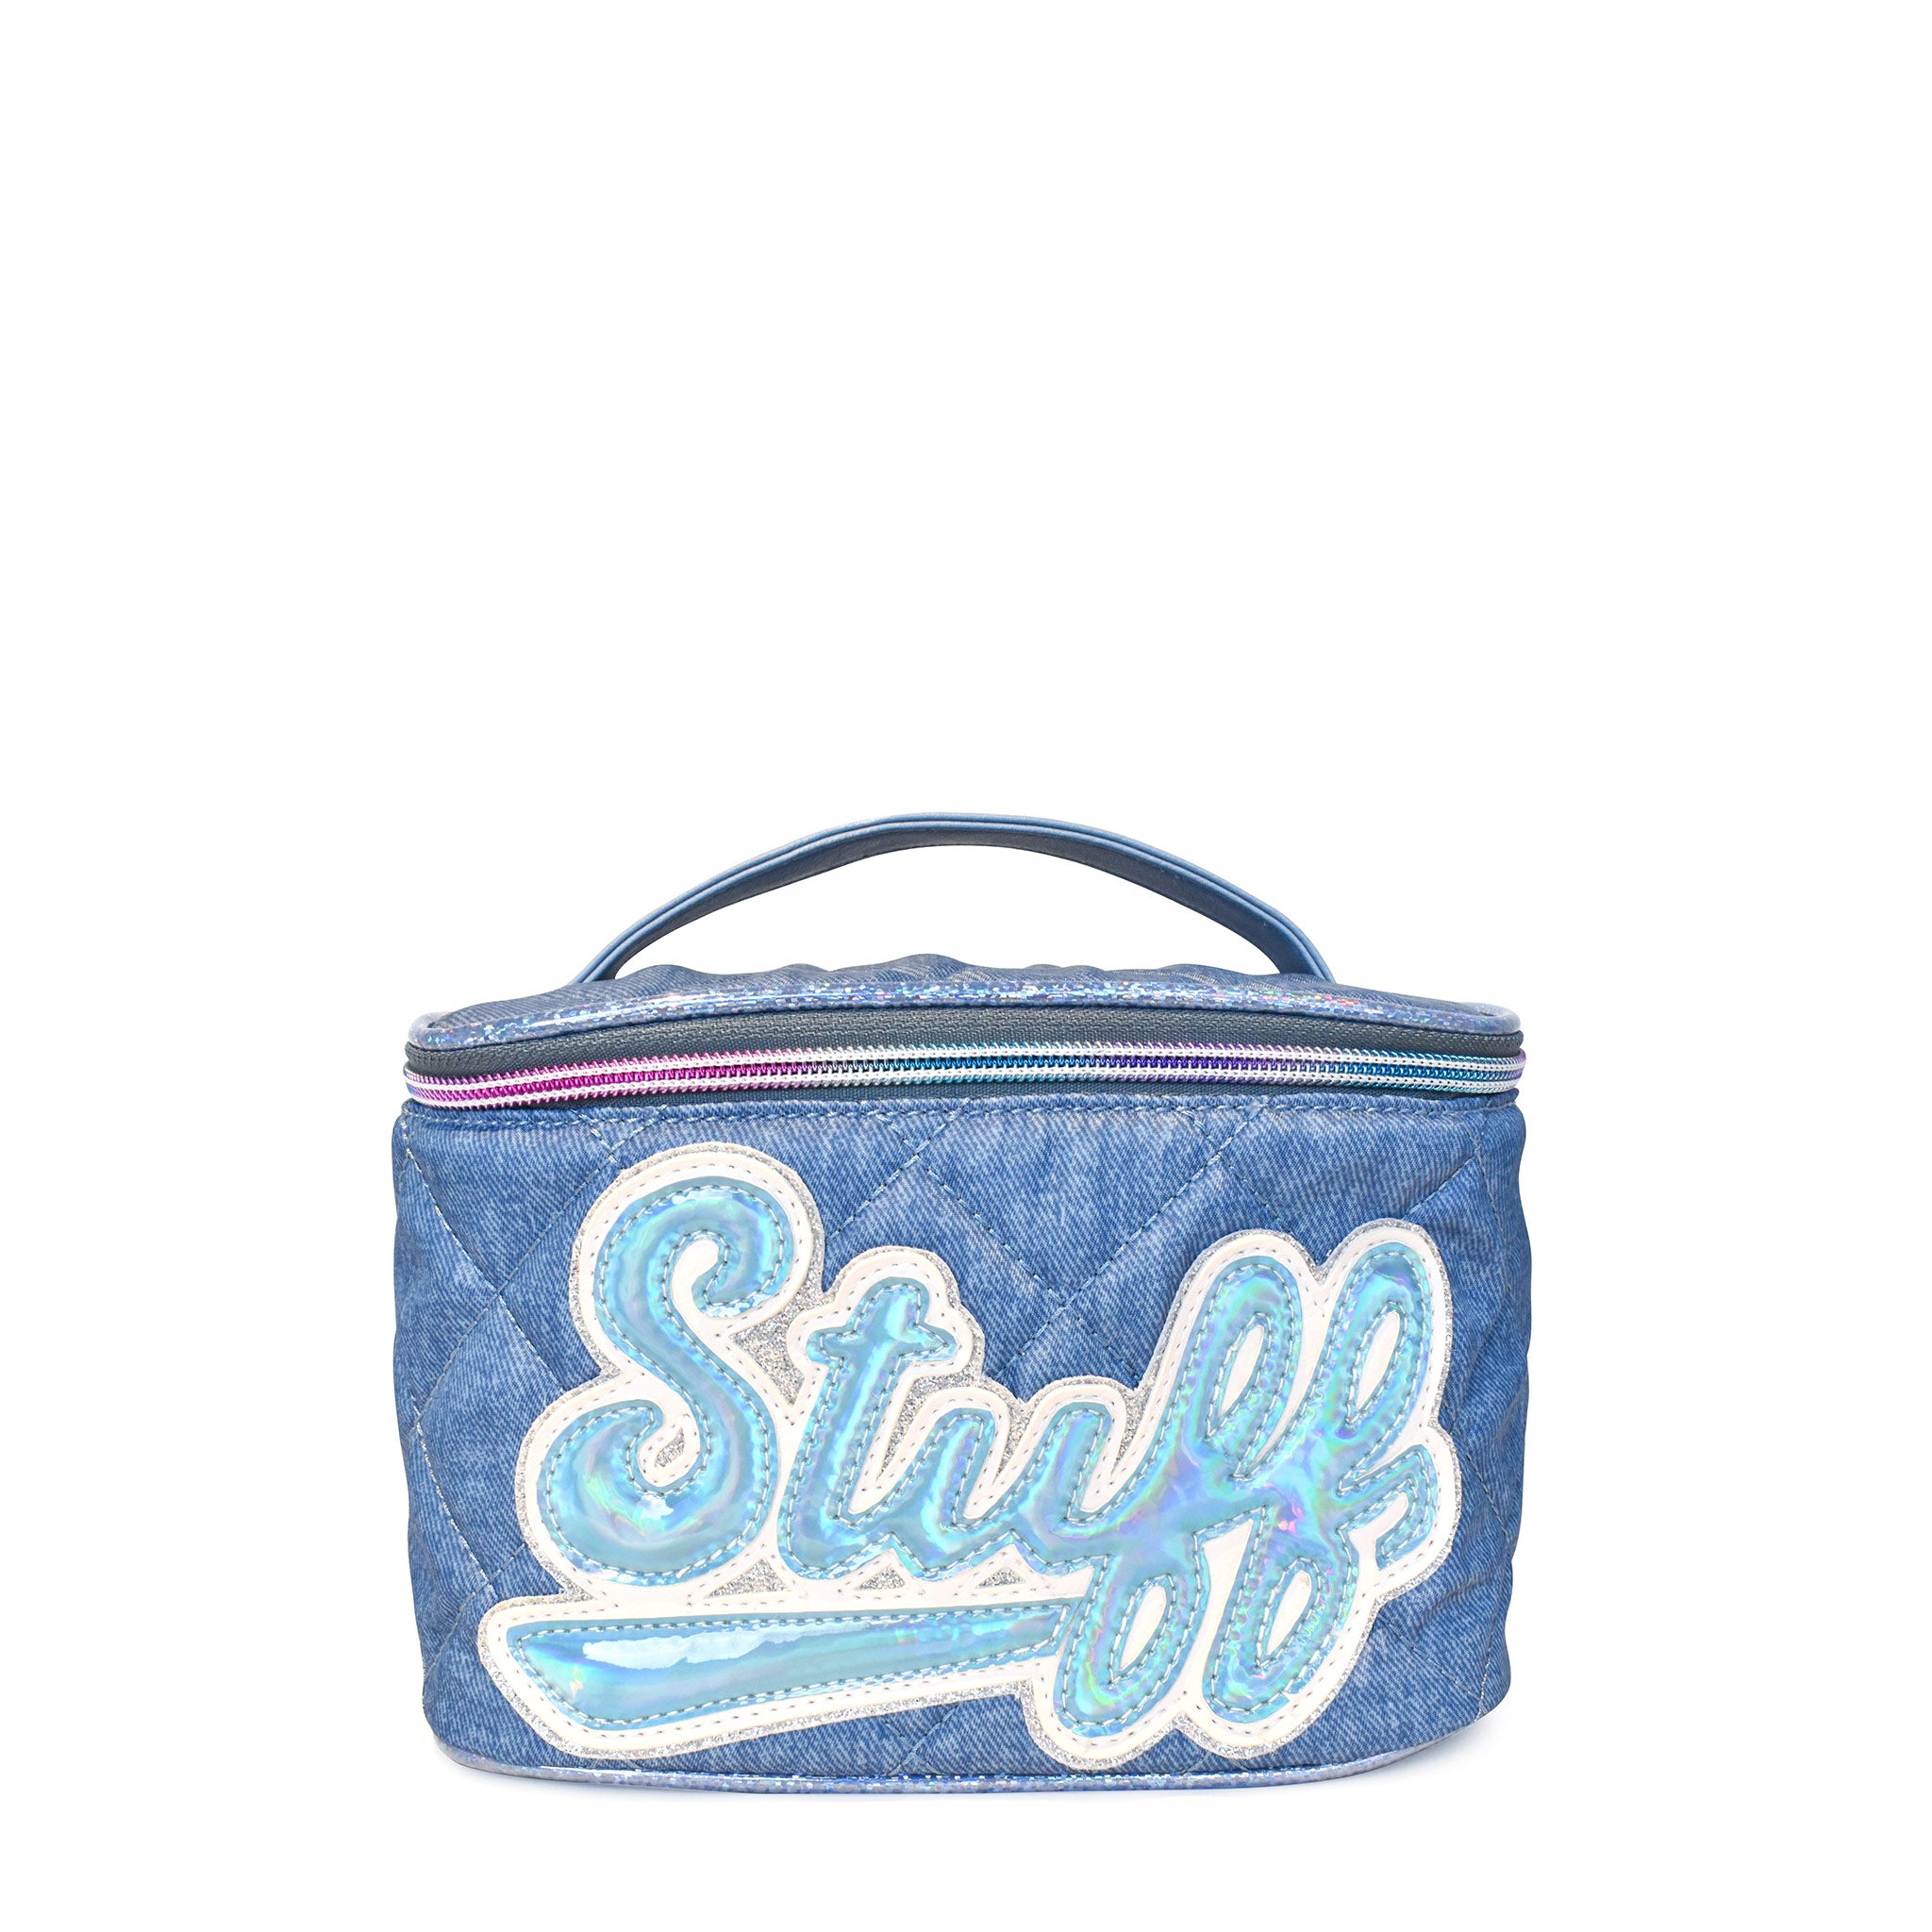 Front view of a denim printed & quilted train case with blue metallic retro-inspired script 'STUFF' applique